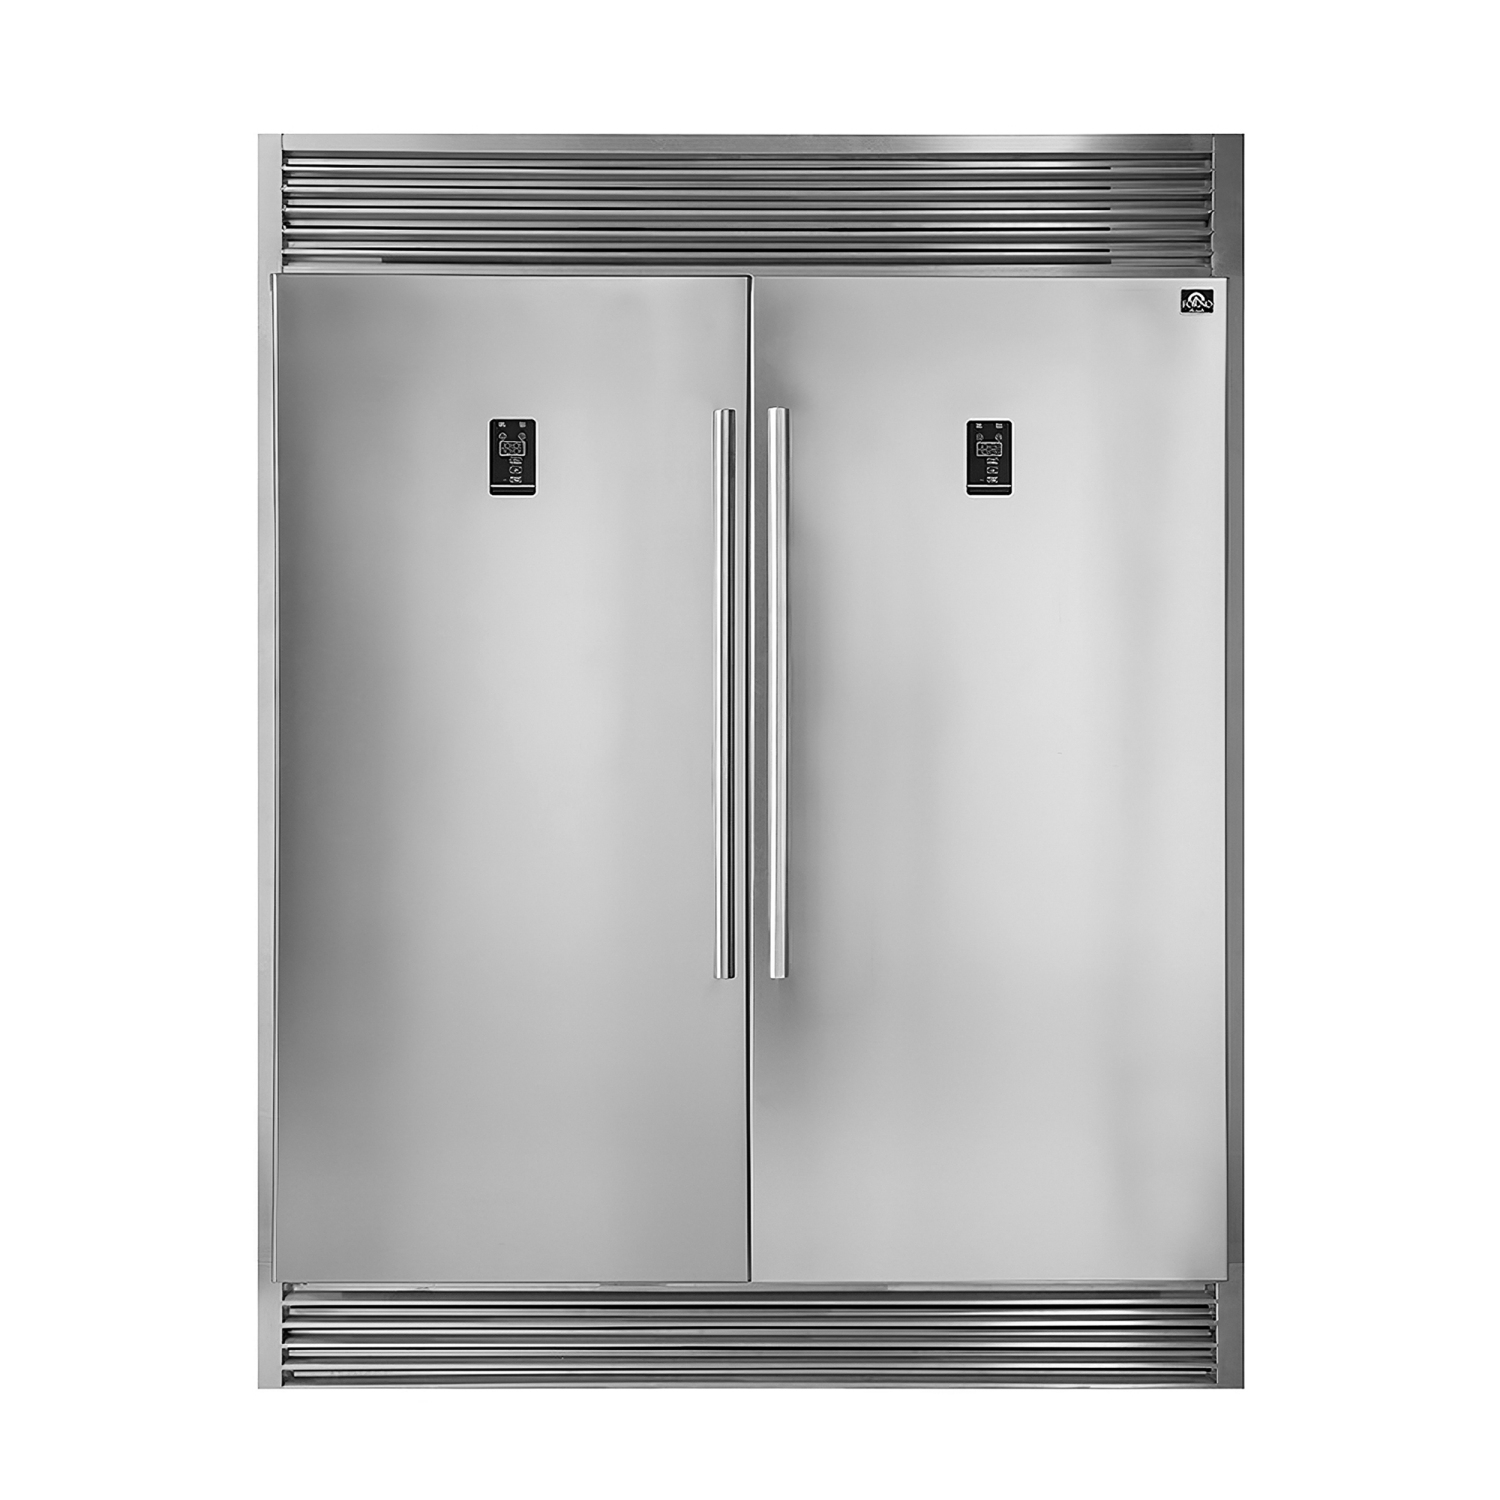 Rizzuto - Refrigerator and Freezer (two in one) 60" Wide with 27.6 cu.ft. Total Storage with decorative grill allowing ventilation